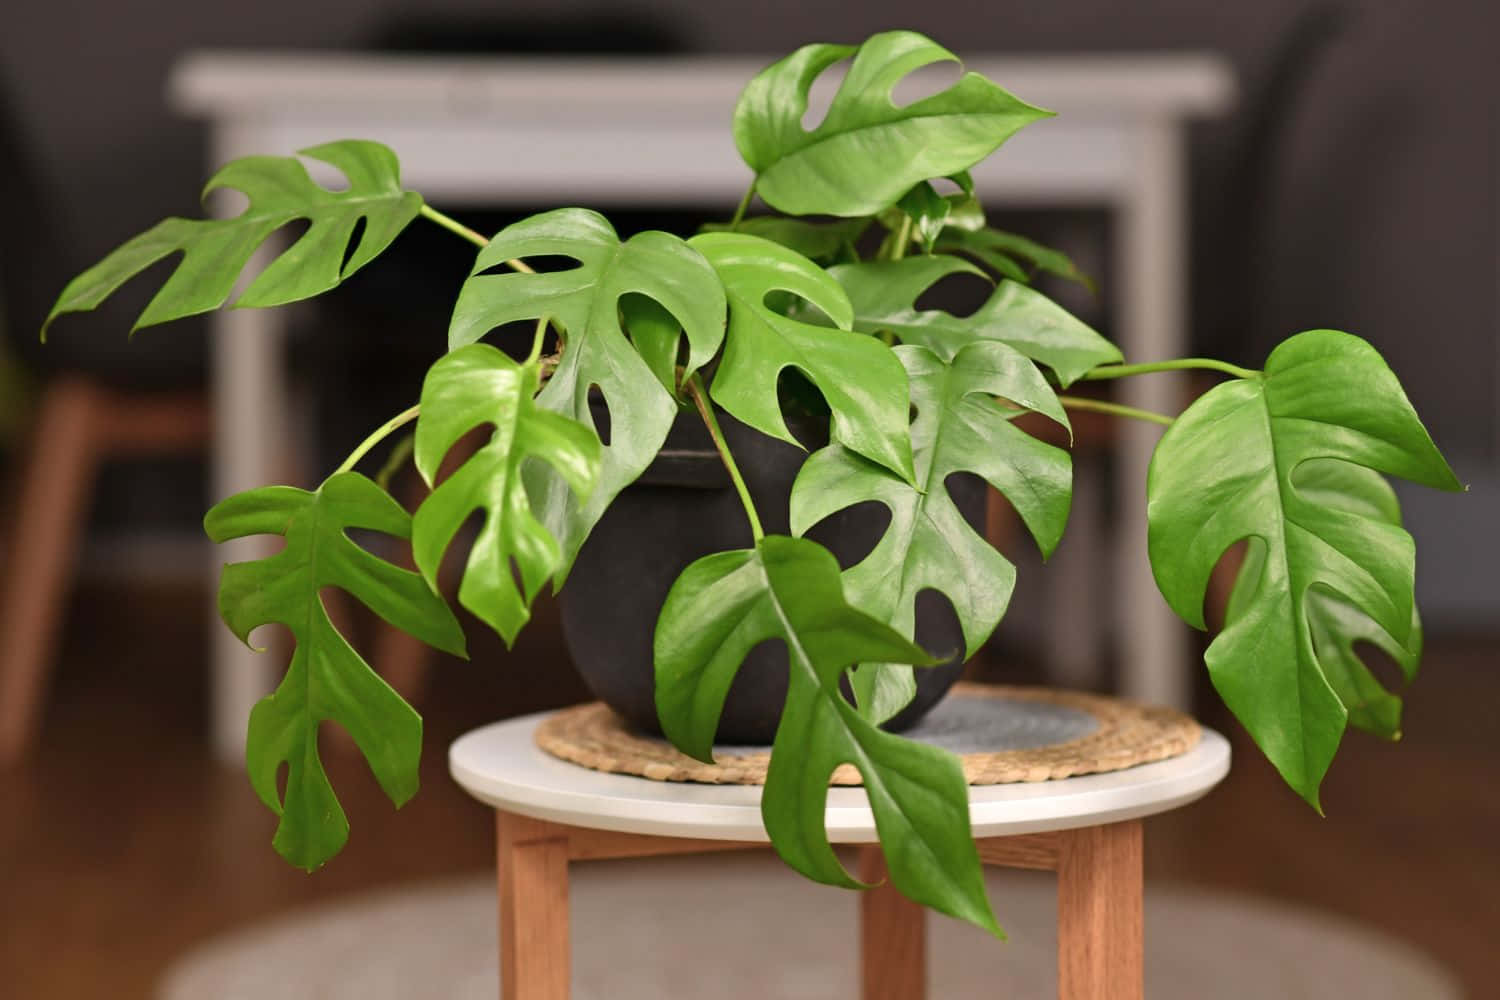 A Monstera Plant On A Small Stool